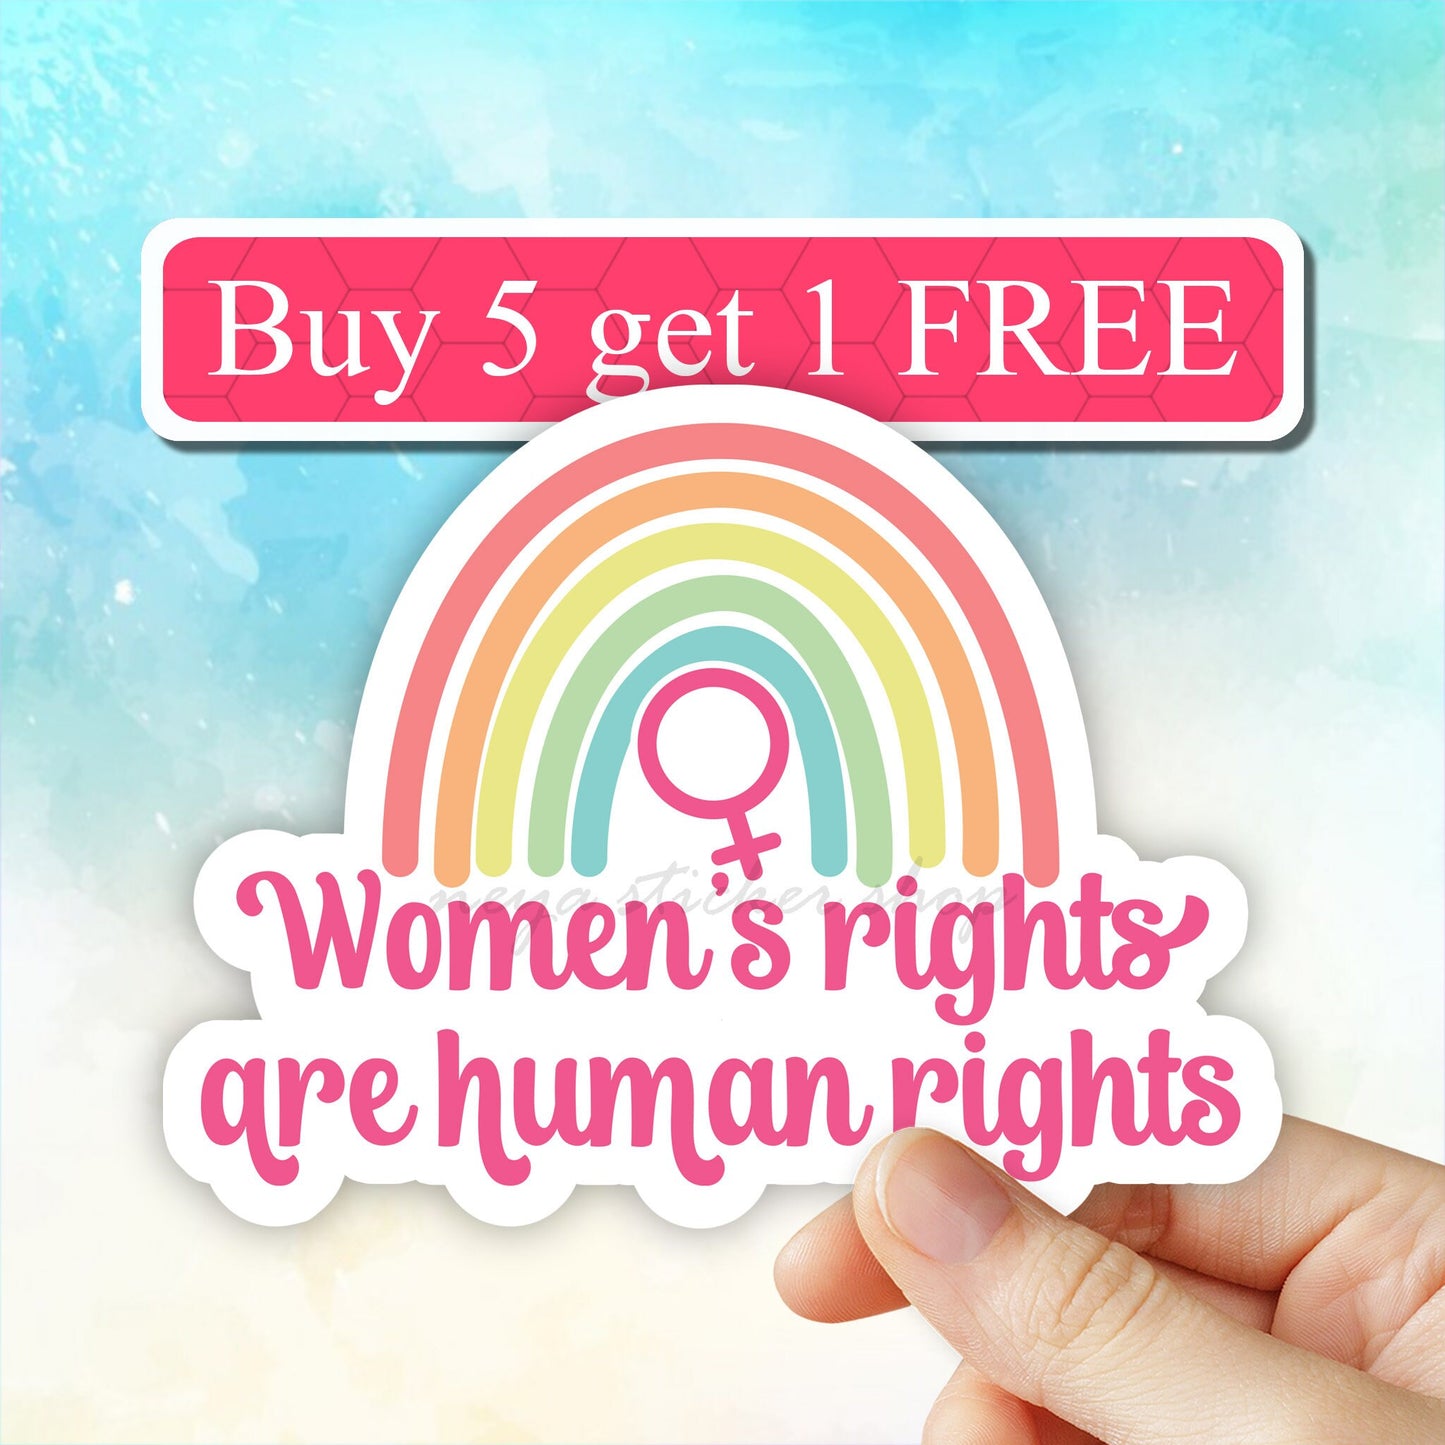 women's rights are human rights Sticker, pro choice sticker, reproductive rights sticker, roe v wade, laptop stickers, feminist stickers